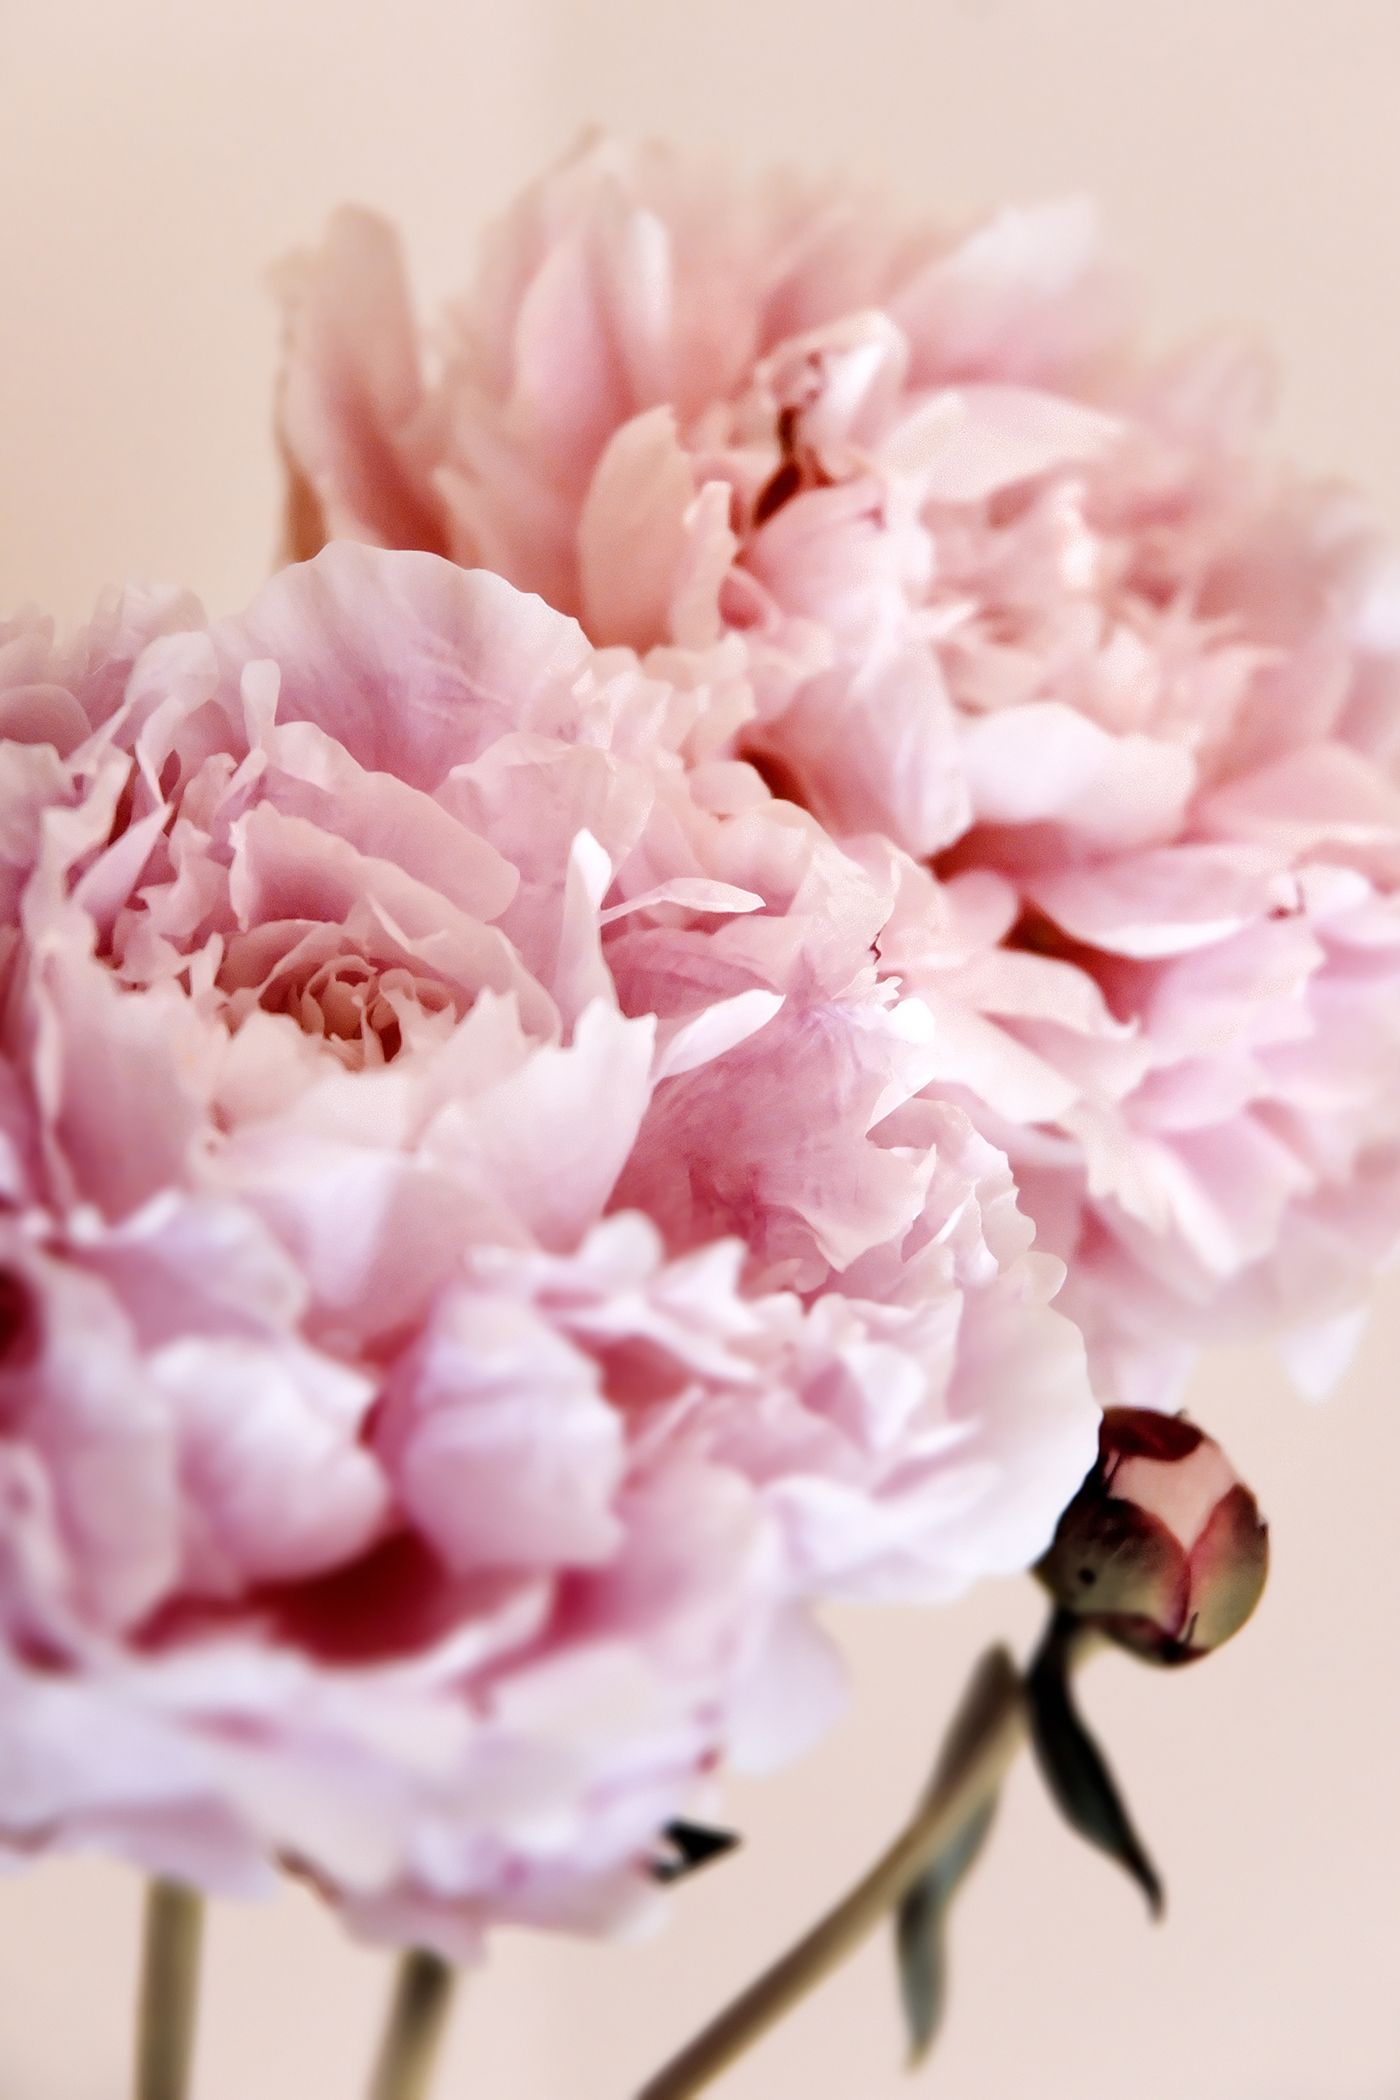 The Most Popular Types of Flowers That Represent Love